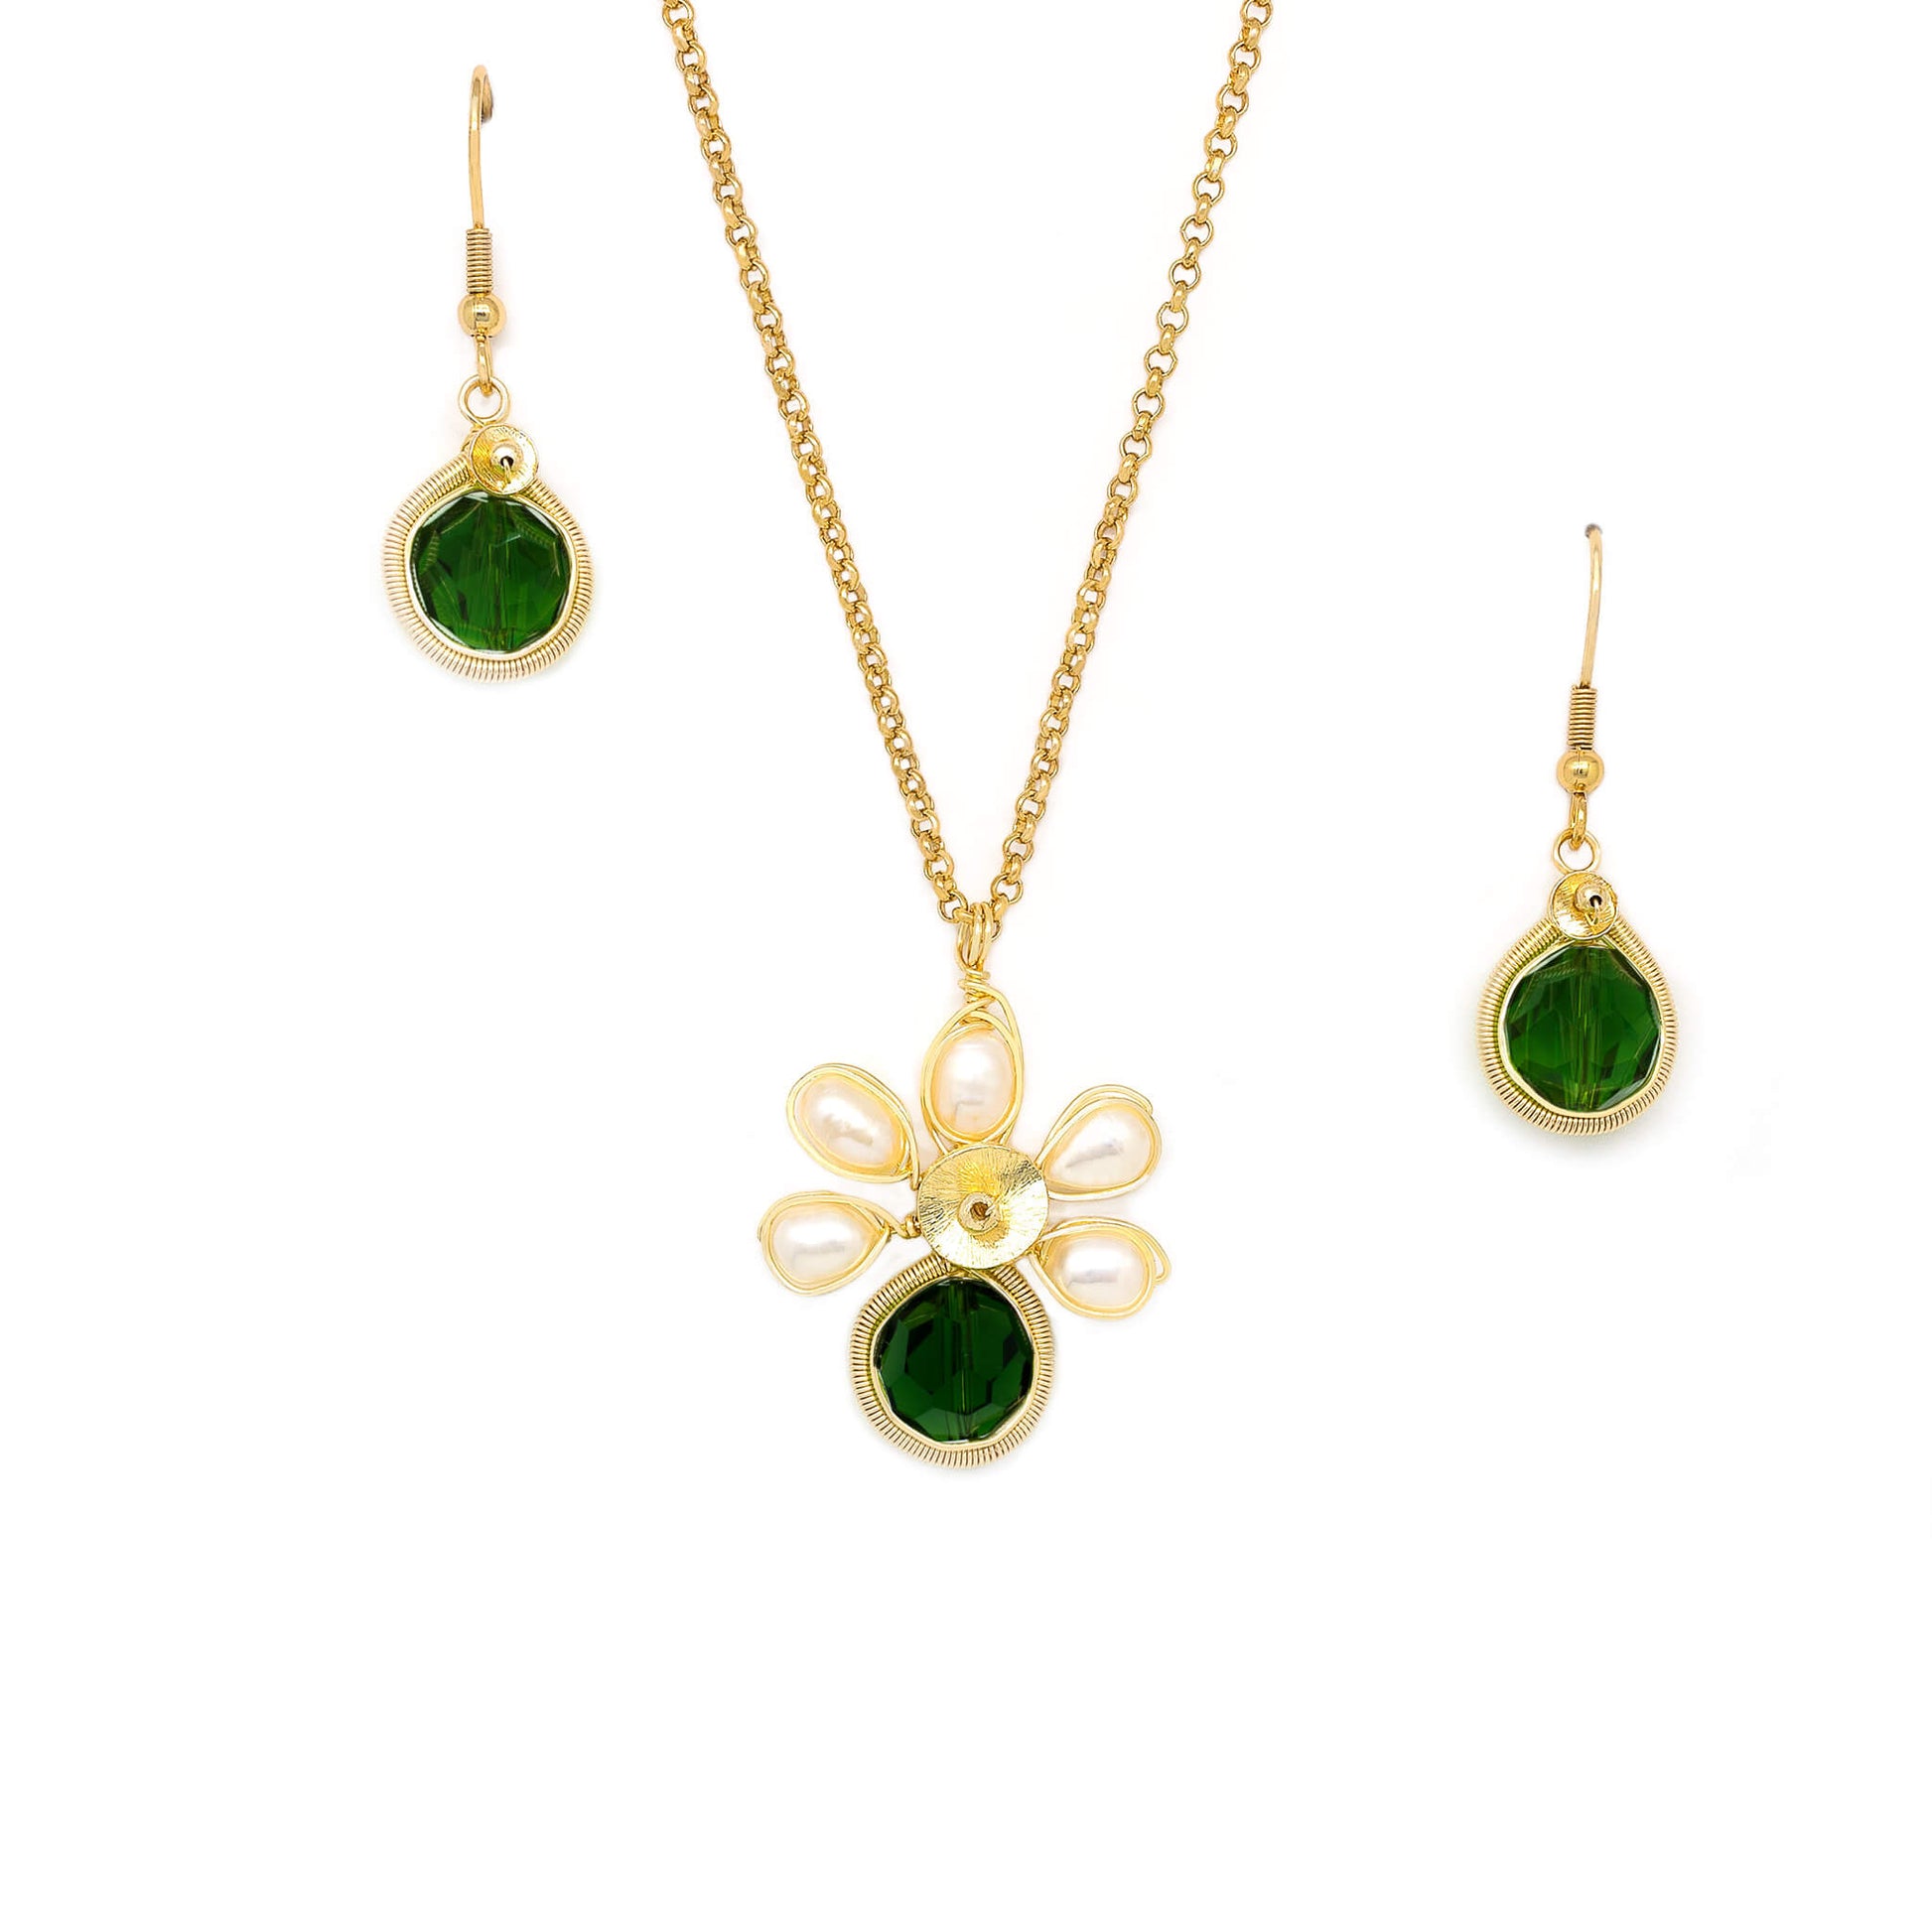 May Birthstone Crystal Necklace.-Earrings Set. Dark Green Crystals, Fresh Water Pearls  and Gold Set. 22K Gold Plated Chain. 